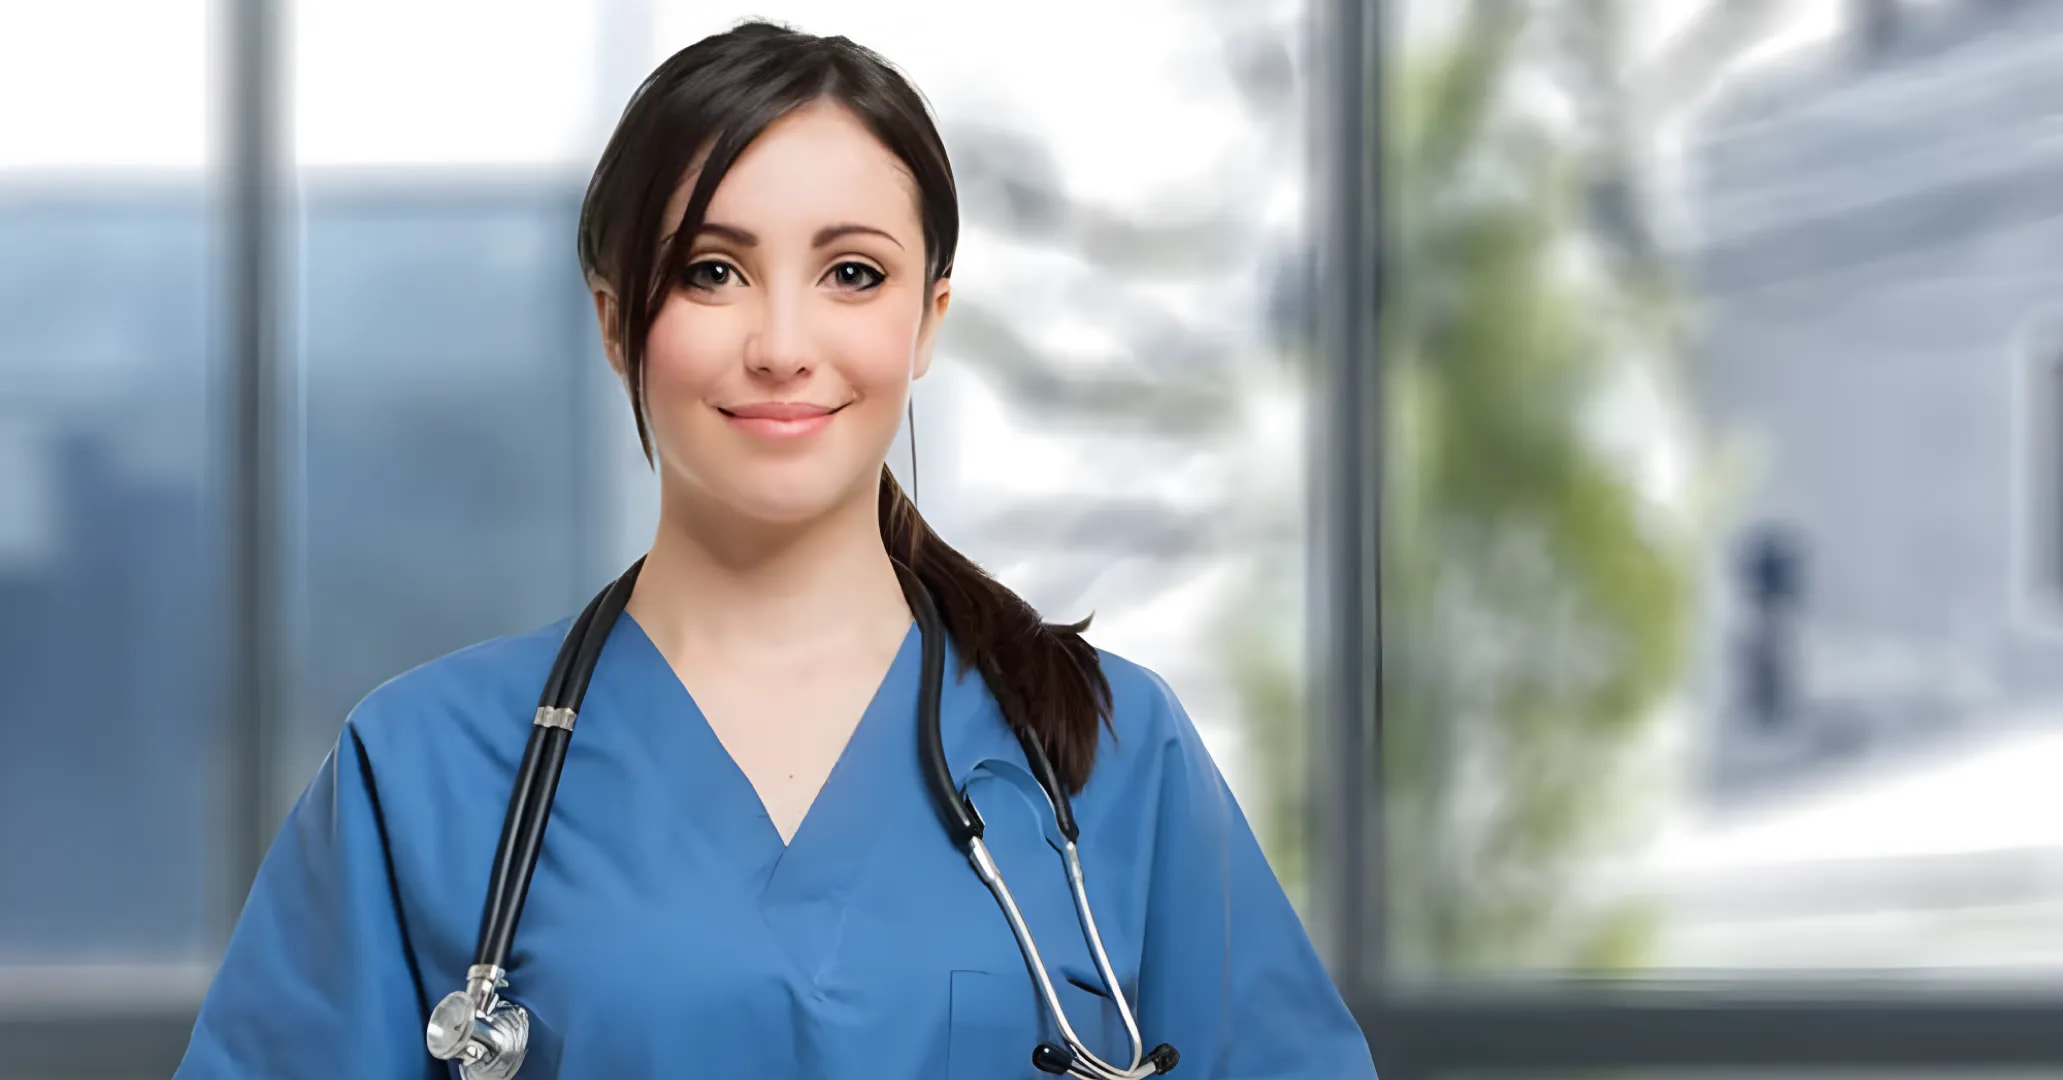 Advantages of Working in Nursing Jobs